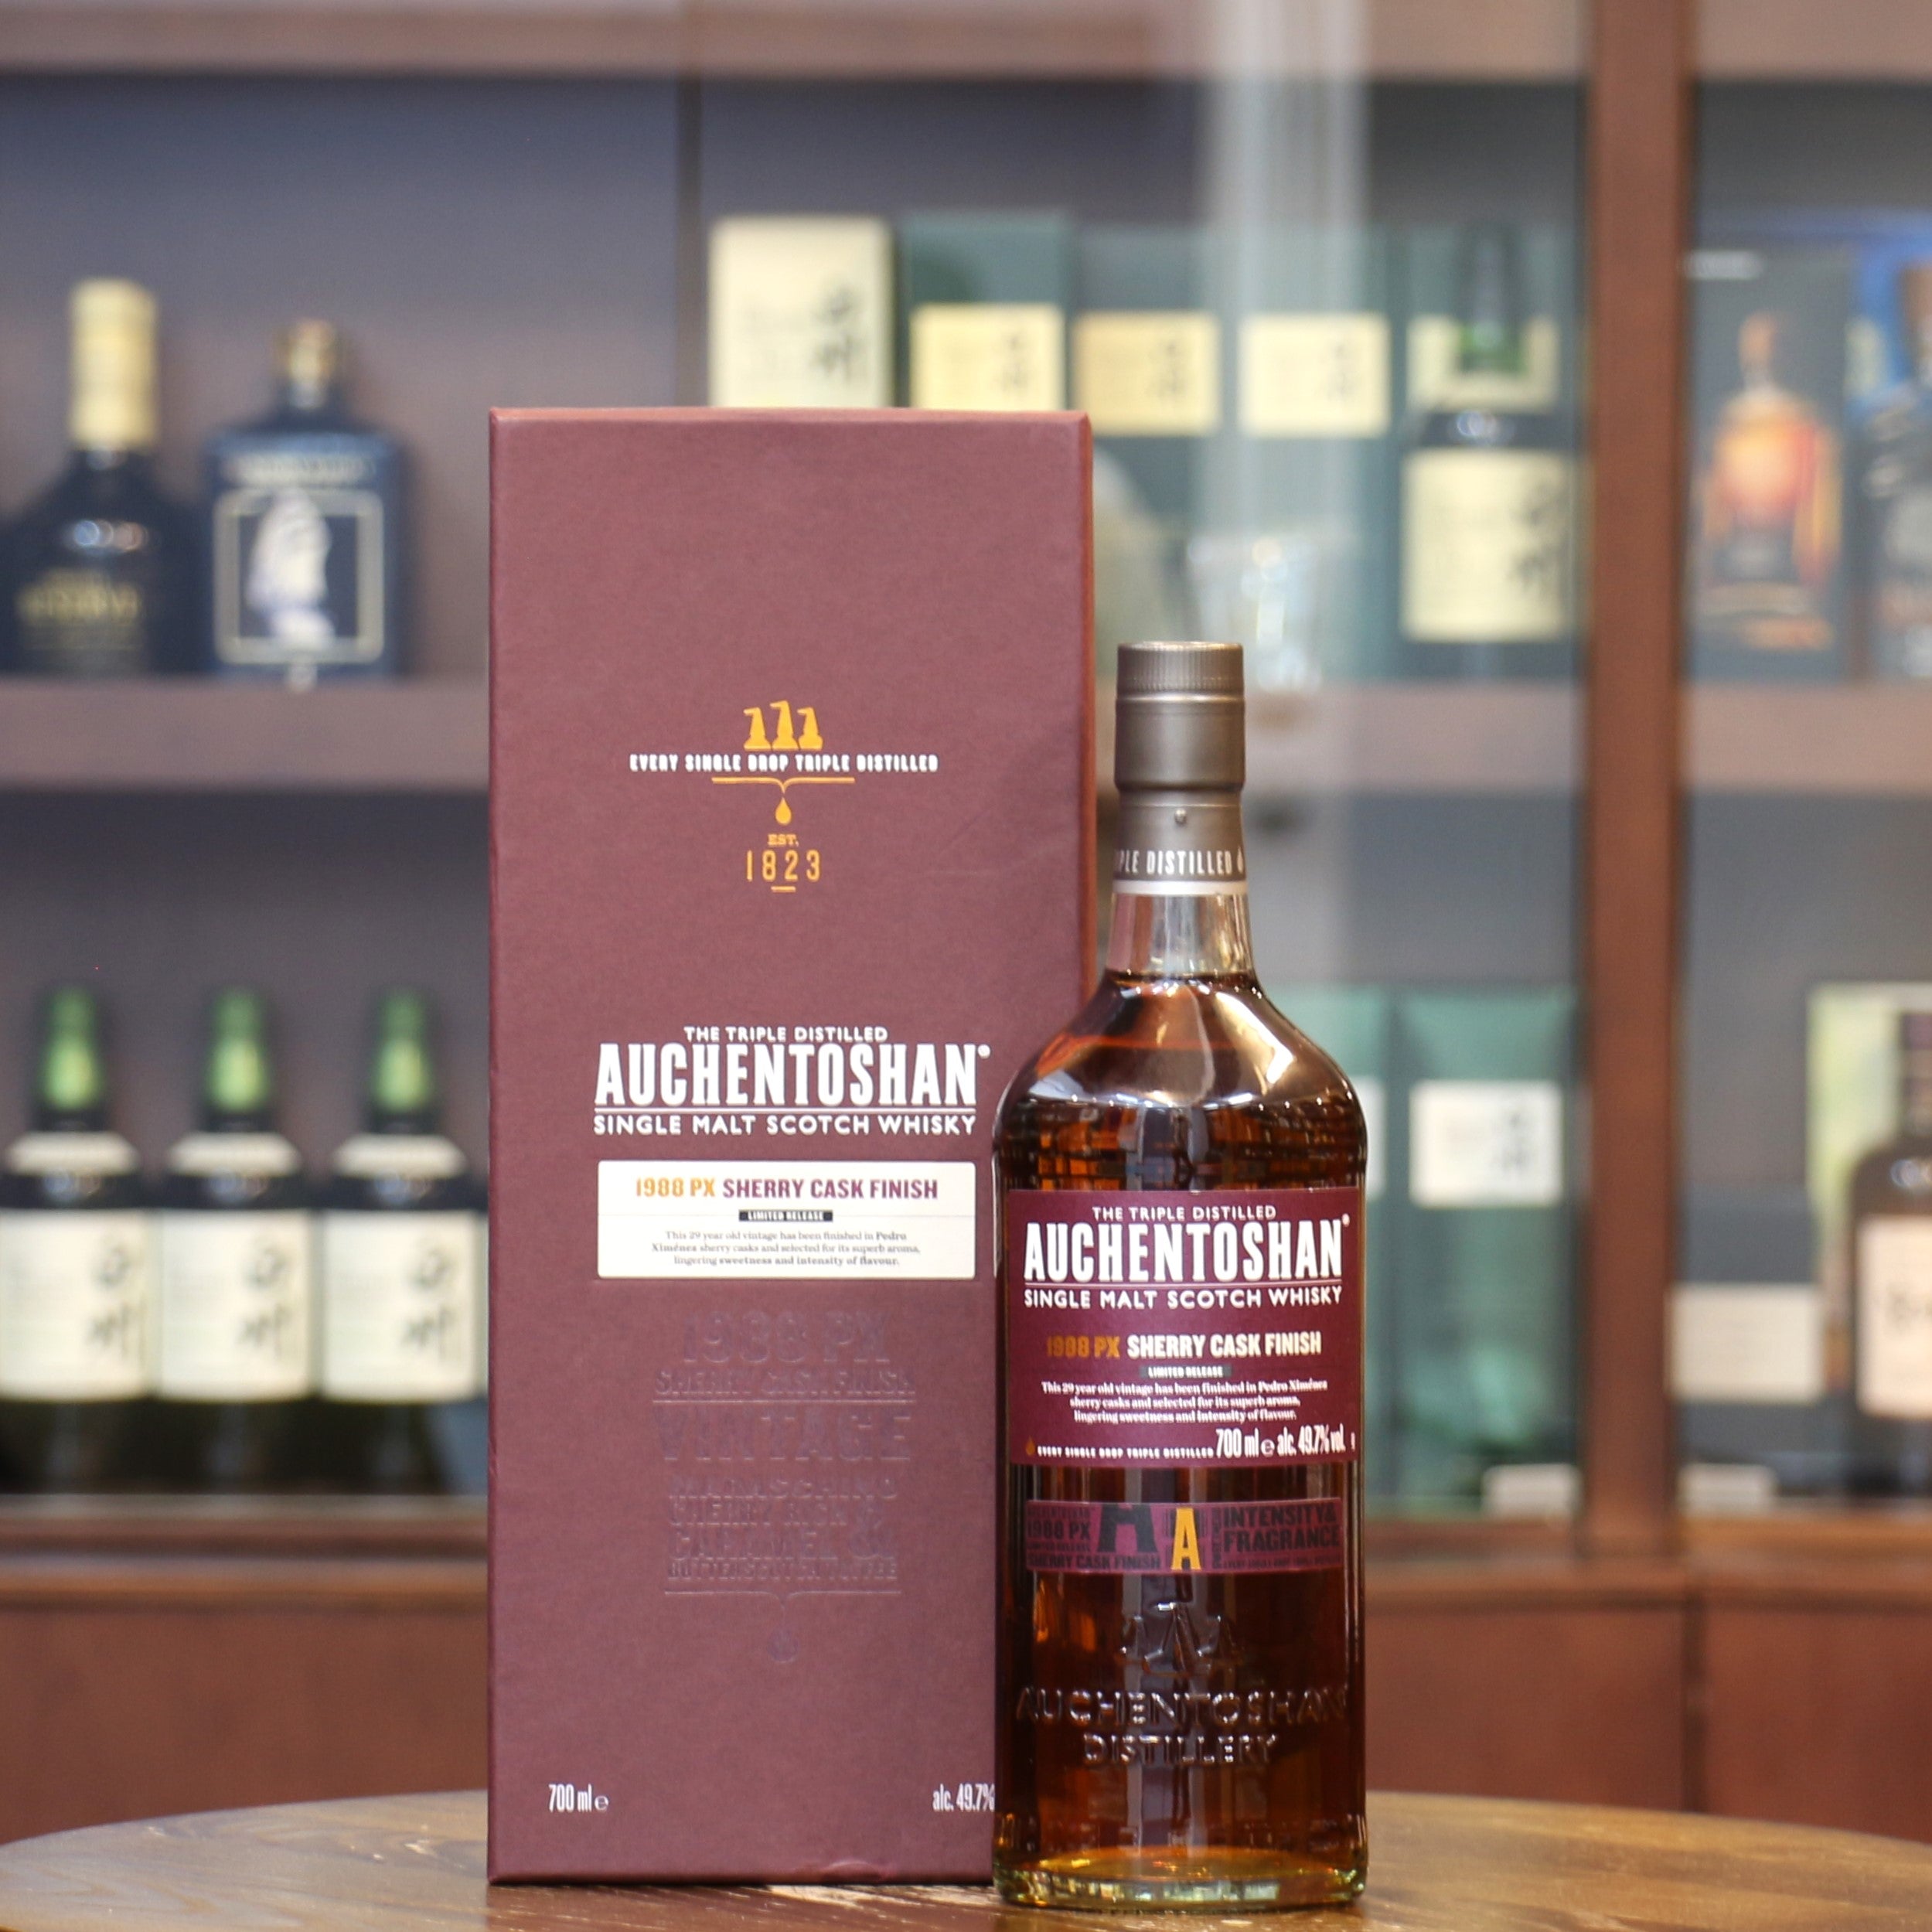 Auchentoshan 1988 Limited Release PX Sherry Cask Finish 29 Years Old Single Malt Scoth Whisky